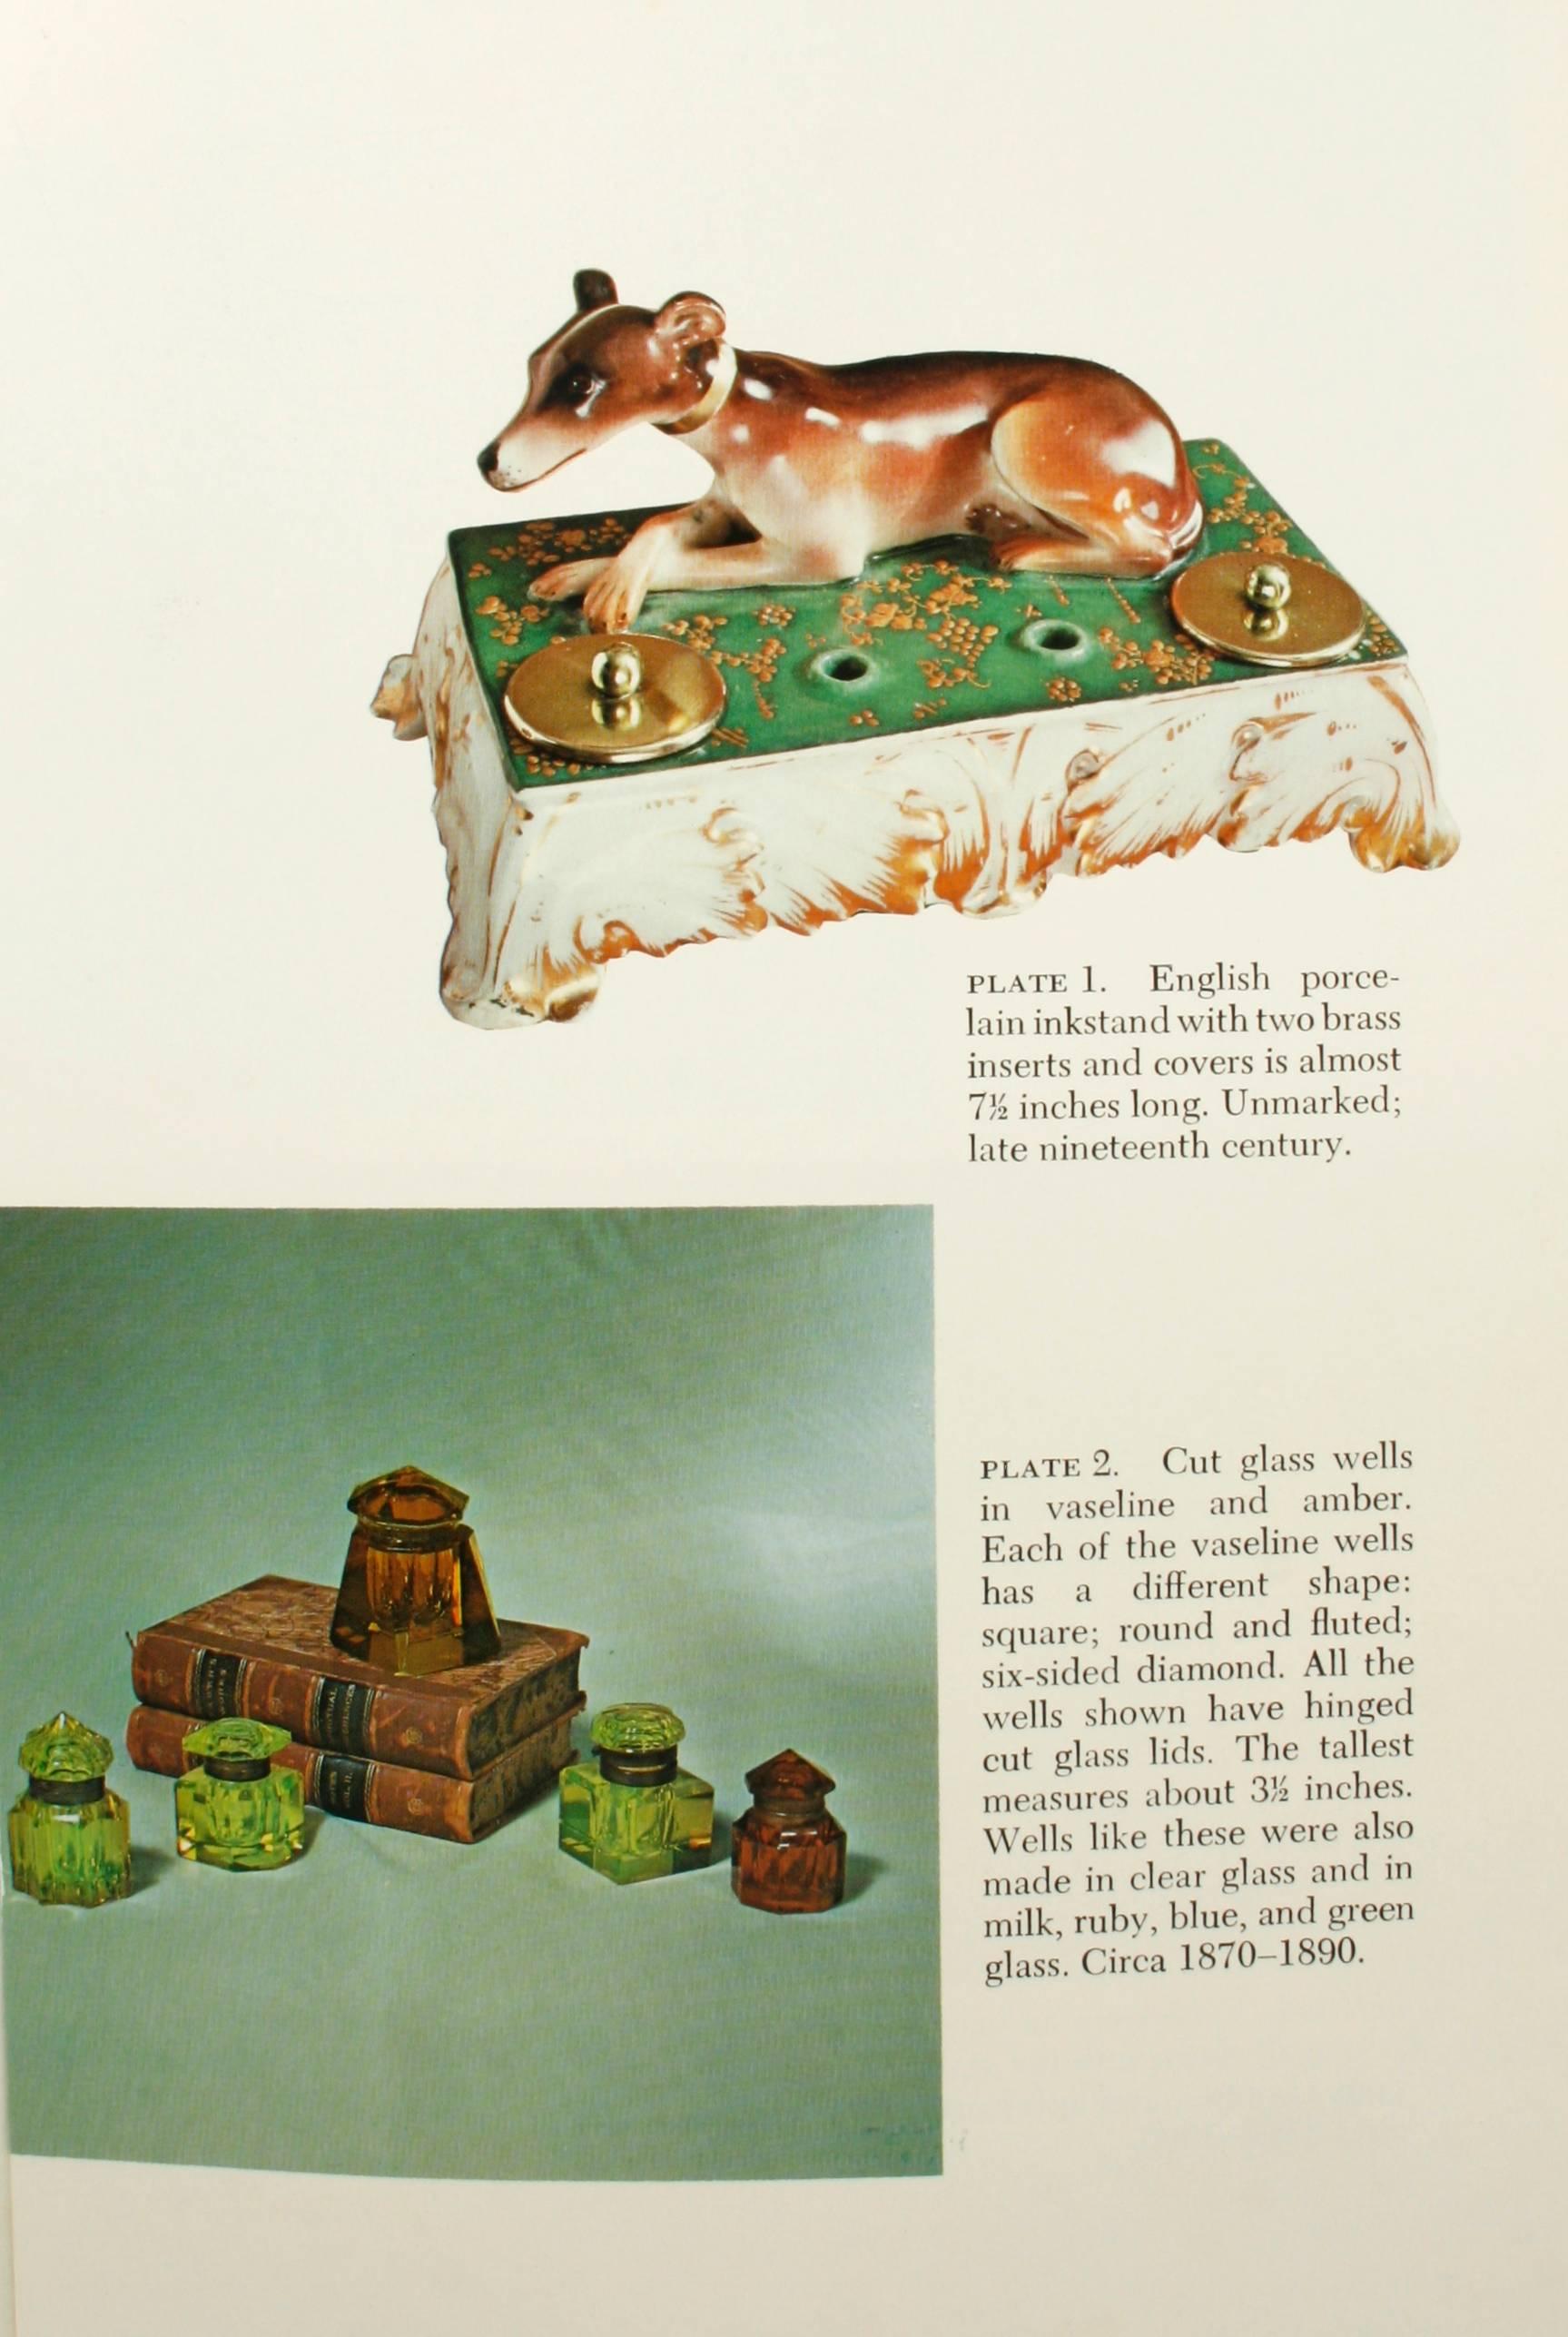 Inkstands and Inkwells, A Collector's Guide by Betty and Ted Rivera. NY, Crown Publishers, Inc., 1973. First edition hardcover with dust jacket. 216 pp. A comprehensive guide to writing paraphernalia from the 17th-20th century including inkstands,